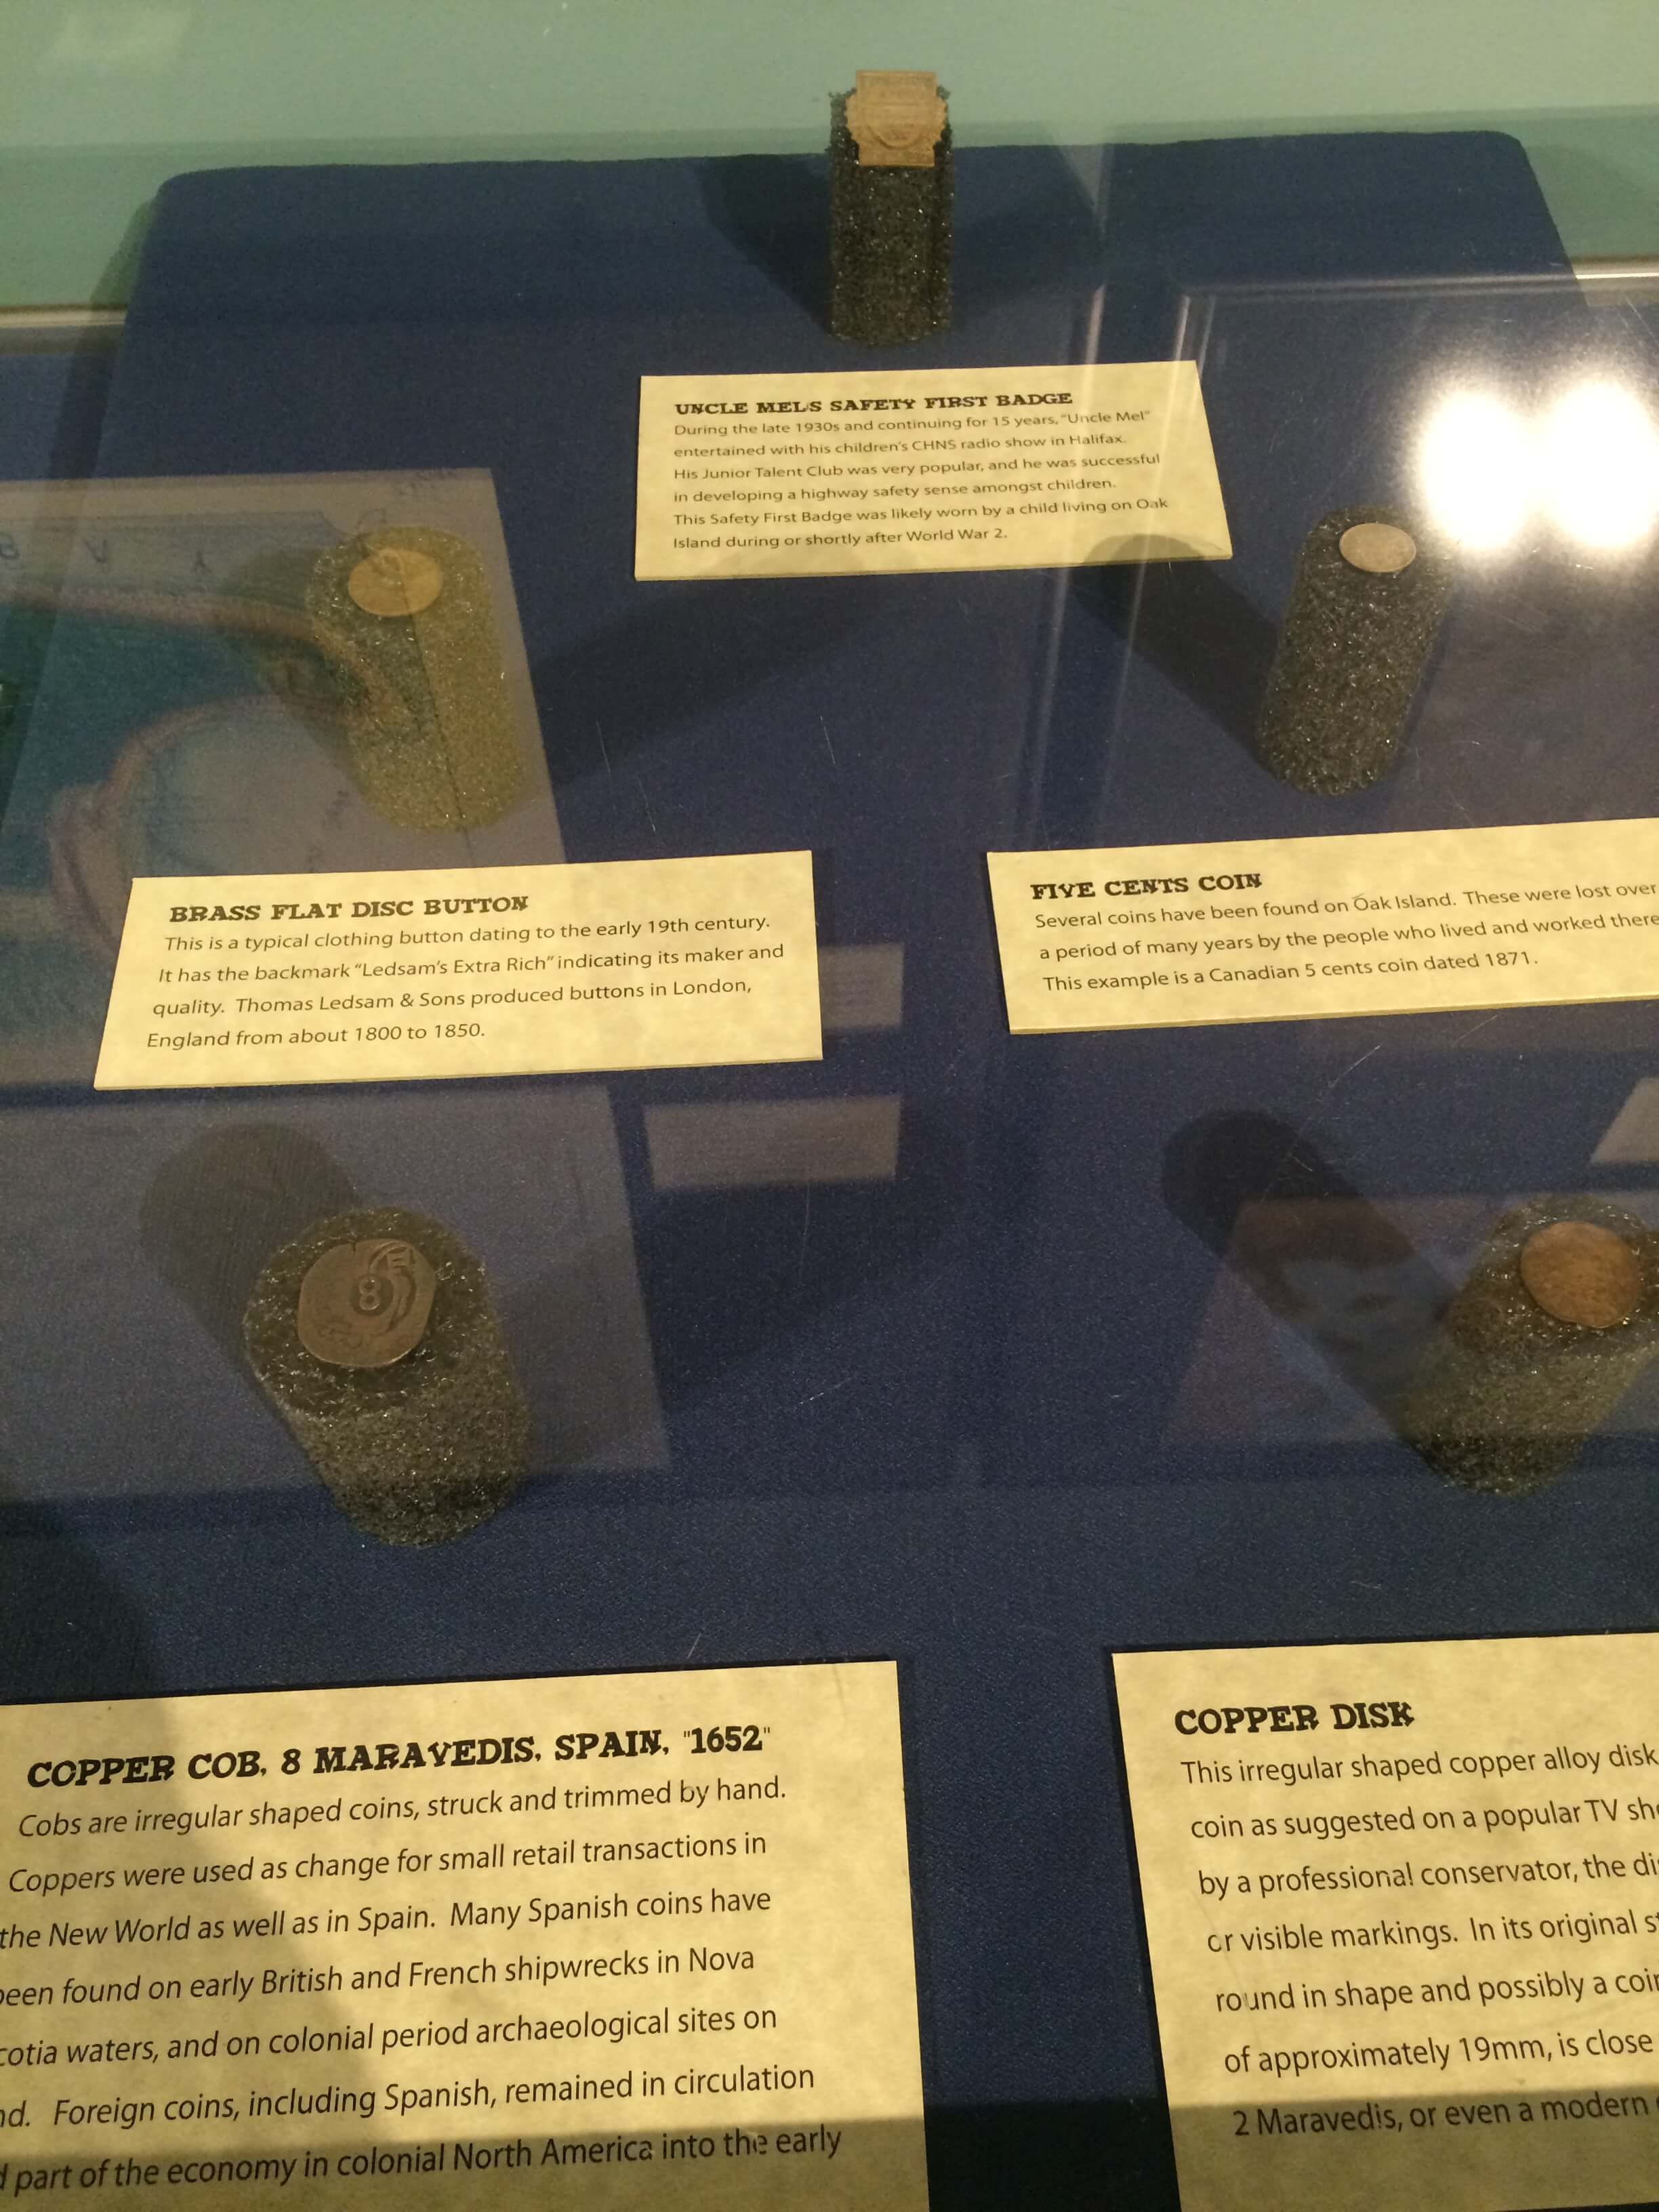 Coins, including a Spanish 8 maravedis, on display at Halifax's Museum of Natural History. Image courtesy of Ryan Phillips.